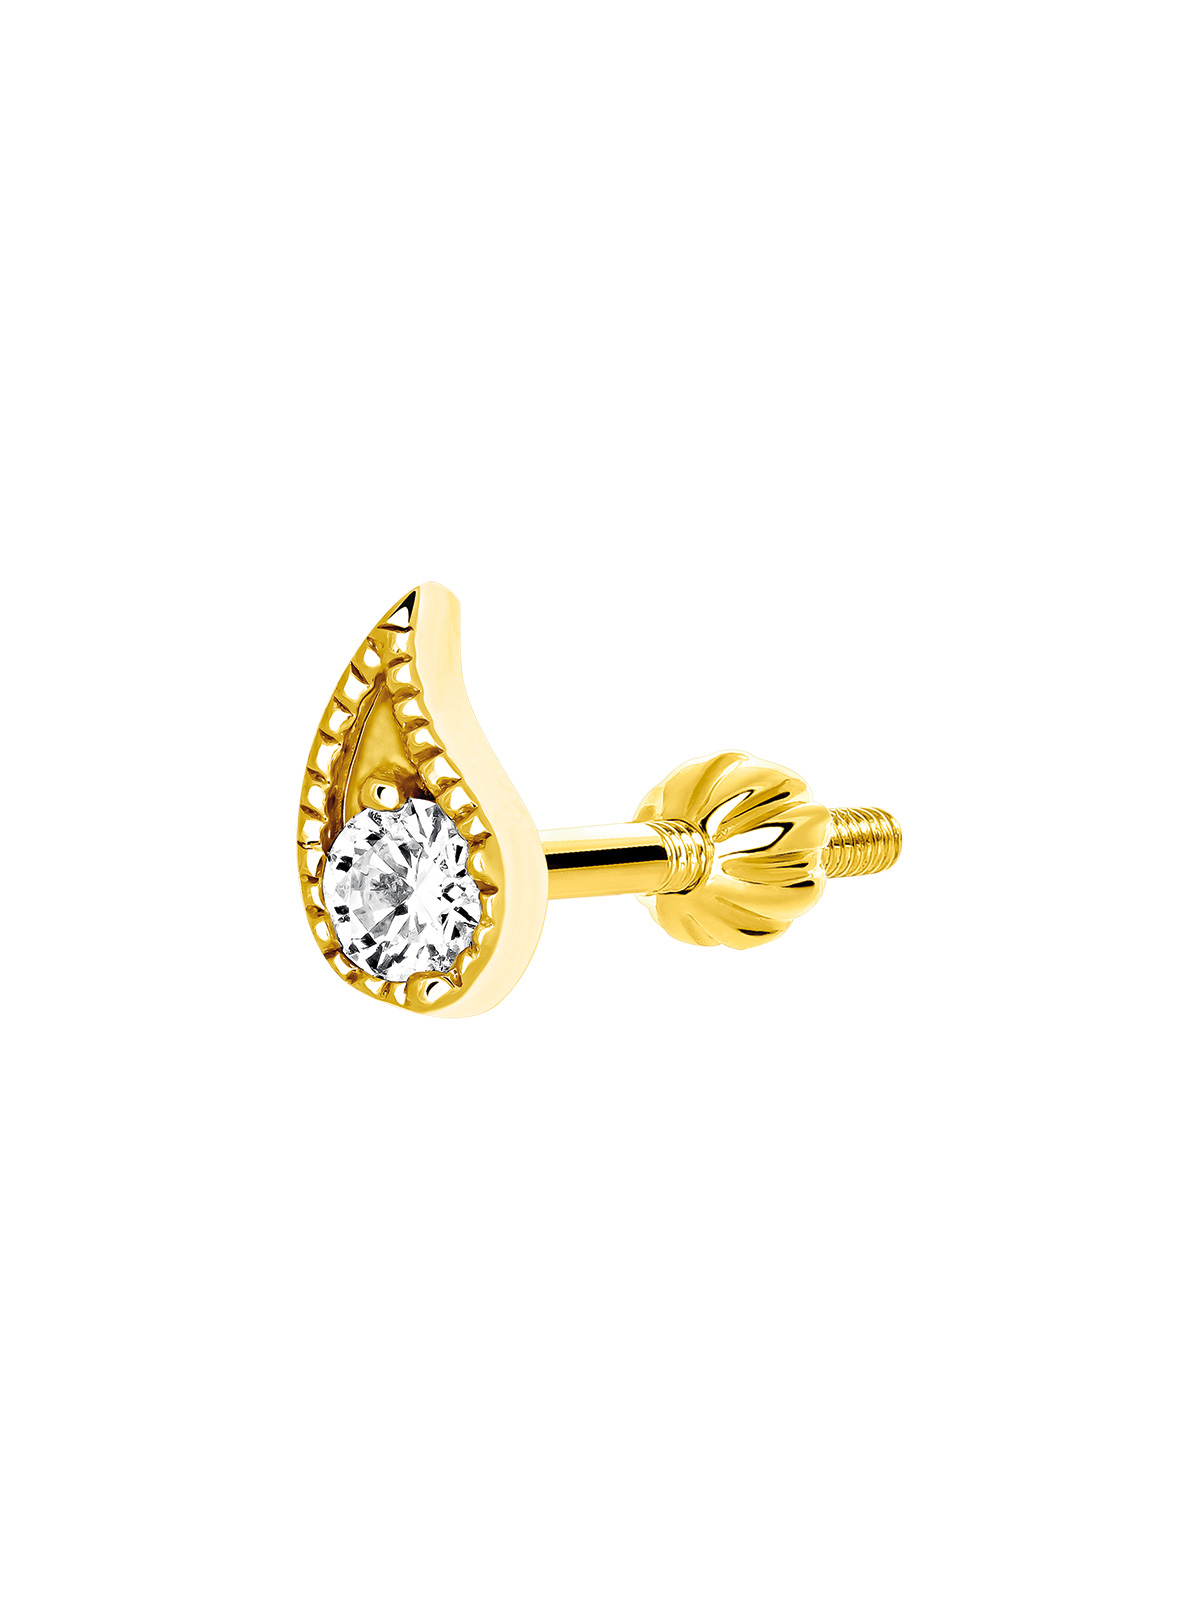 Individual 9K yellow gold earring in the shape of a butterfly with a diamond.